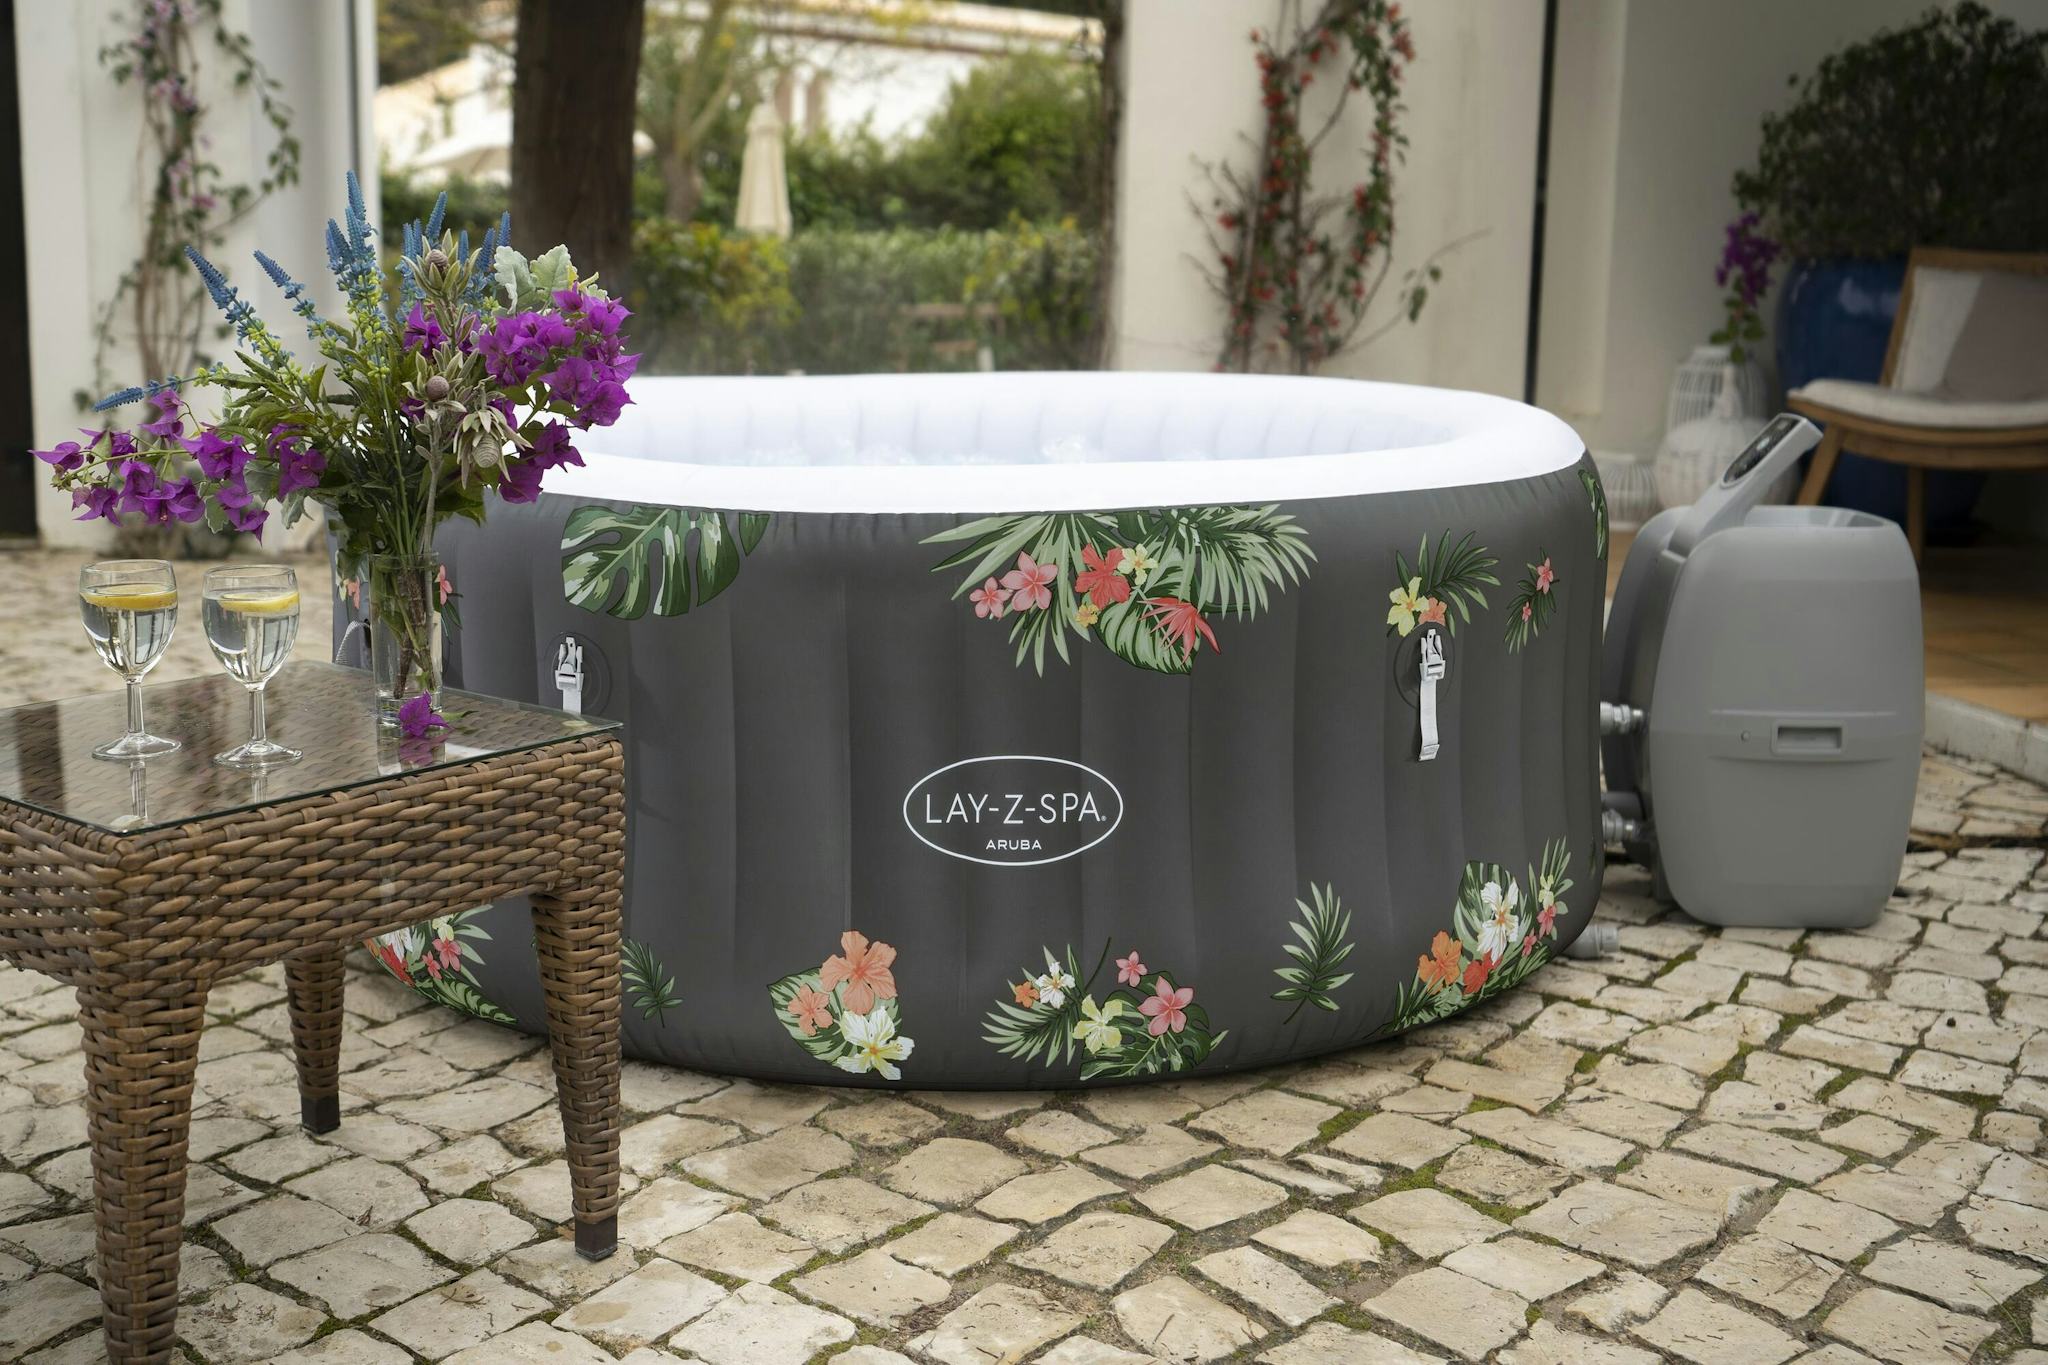 Spas Gonflables Spa gonflable rond Lay-Z-Spa Aruba Airjet™ 2 - 3 personnes Bestway 29